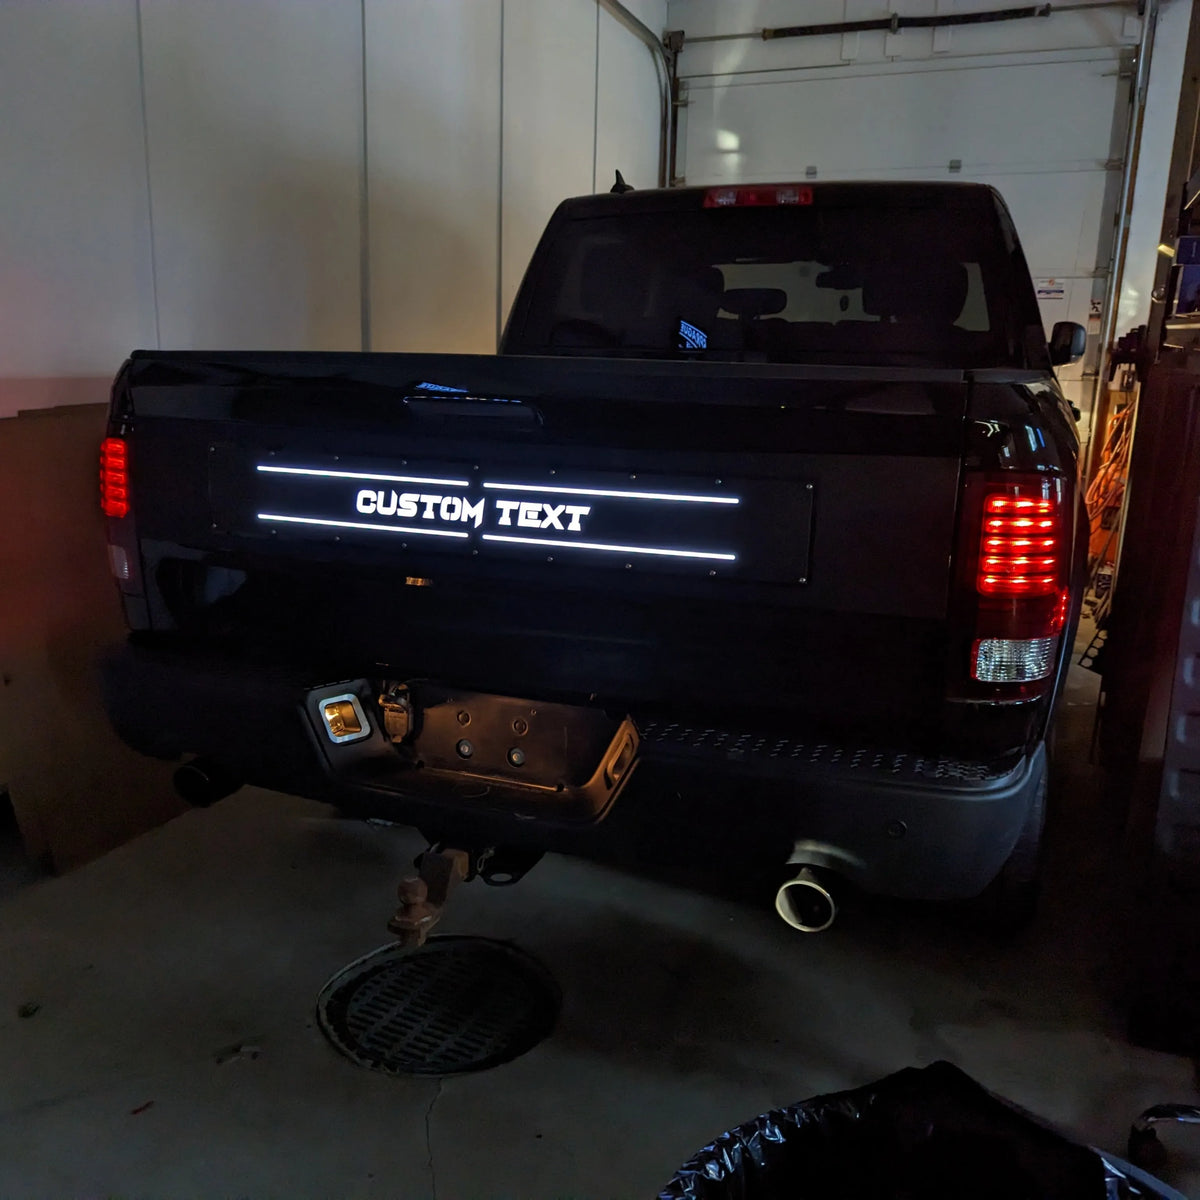 Custom Text LED Tailgate Applique - Fits 2009-2018 RAM® 1500 and 2019-2022 RAM Classic